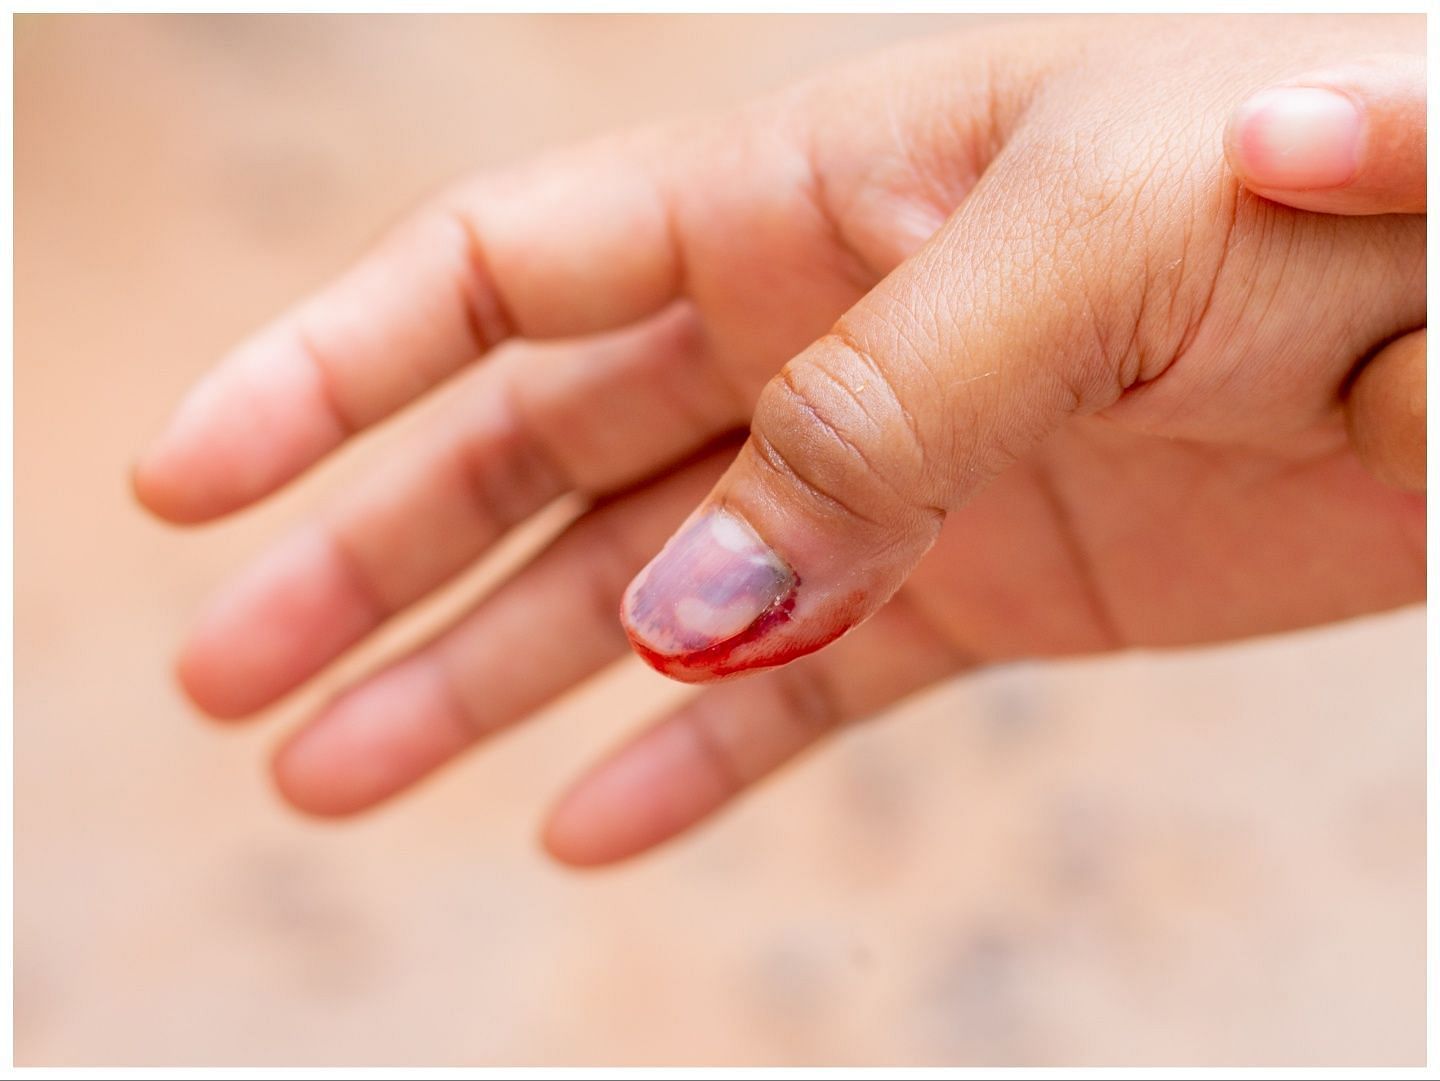 Nail infection can permanently damage your nails (Image via Vecteezy)